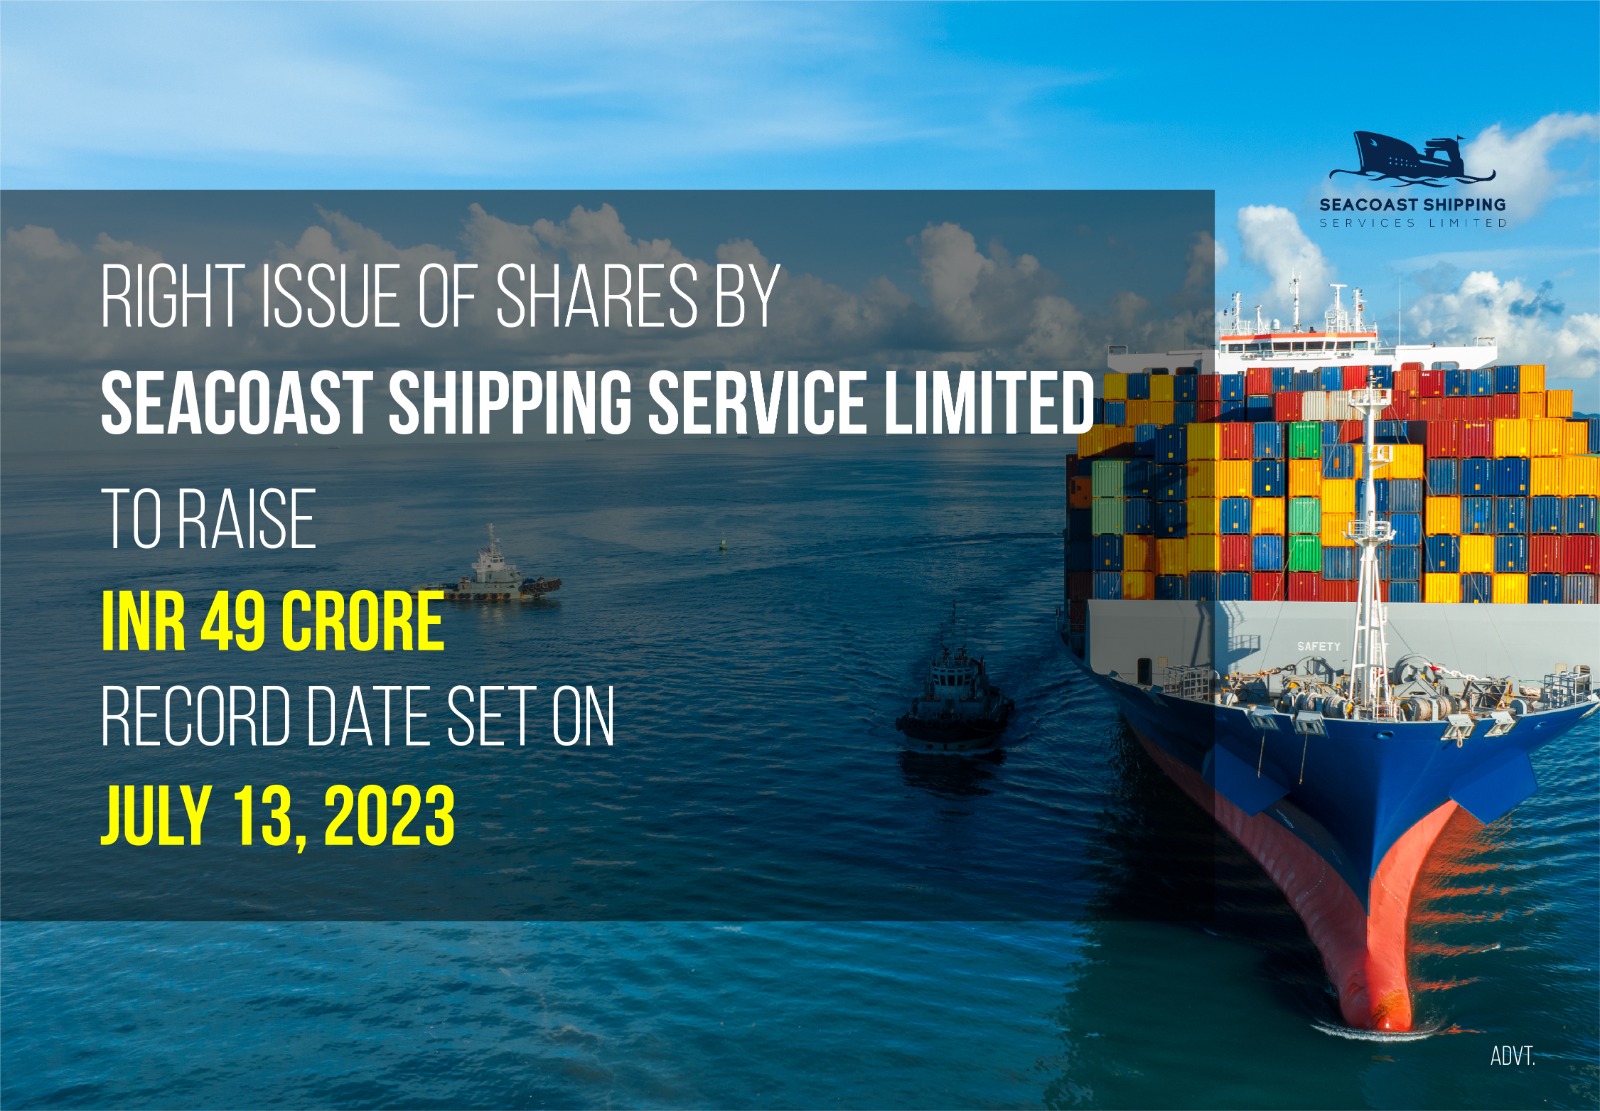 Seacoast Shipping Service Limited To Secure Rs.49 Crore via Share Rights Issue, Record Date Confirmed As July 13th, 2023